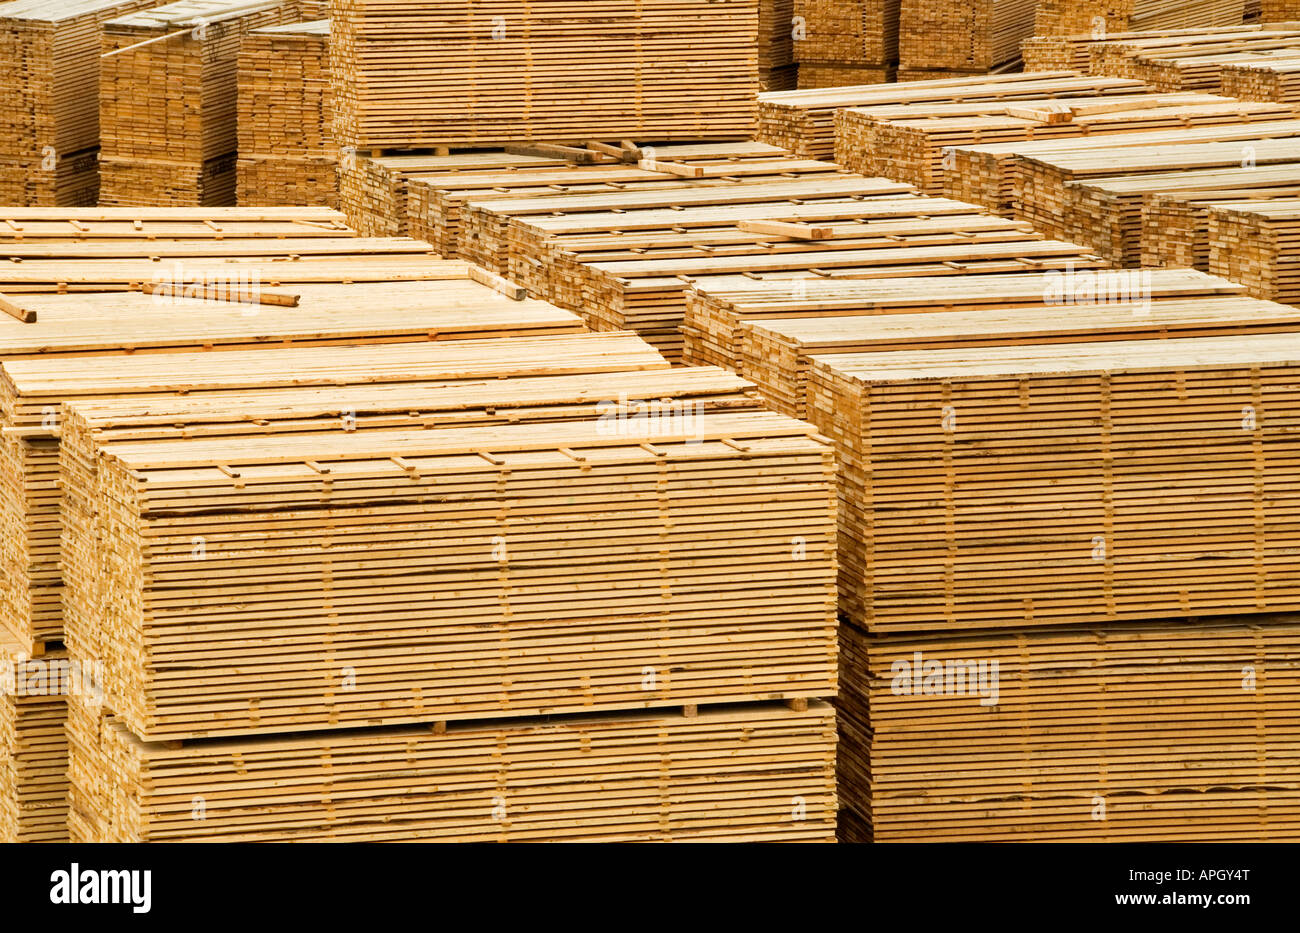 Stacks of timber at Two-Mile Flat, Quesnel, British Columbia, Canada Stock Photo